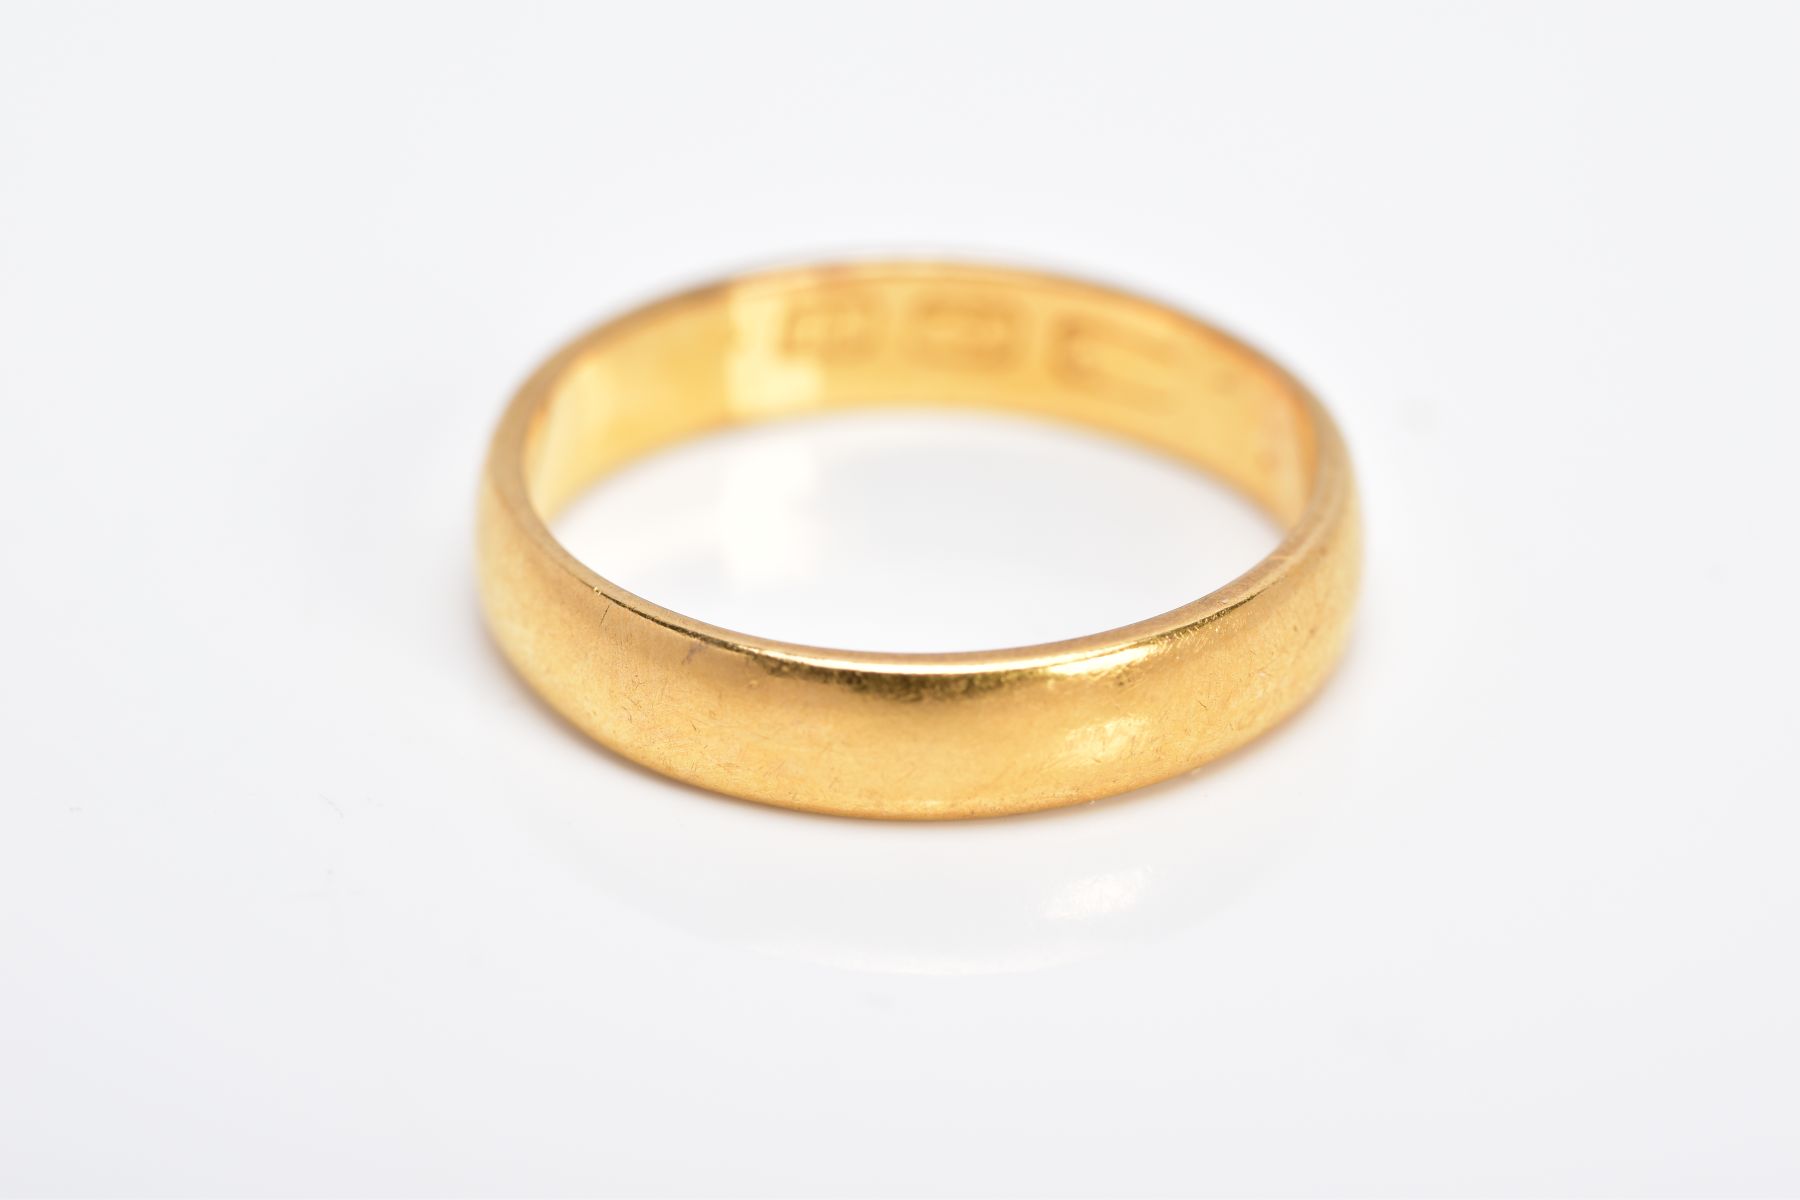 AN EARLY 20TH CENTURY 22CT GOLD WEDDING RING, plain D shape cross band measuring approximately 3.5mm - Image 2 of 2